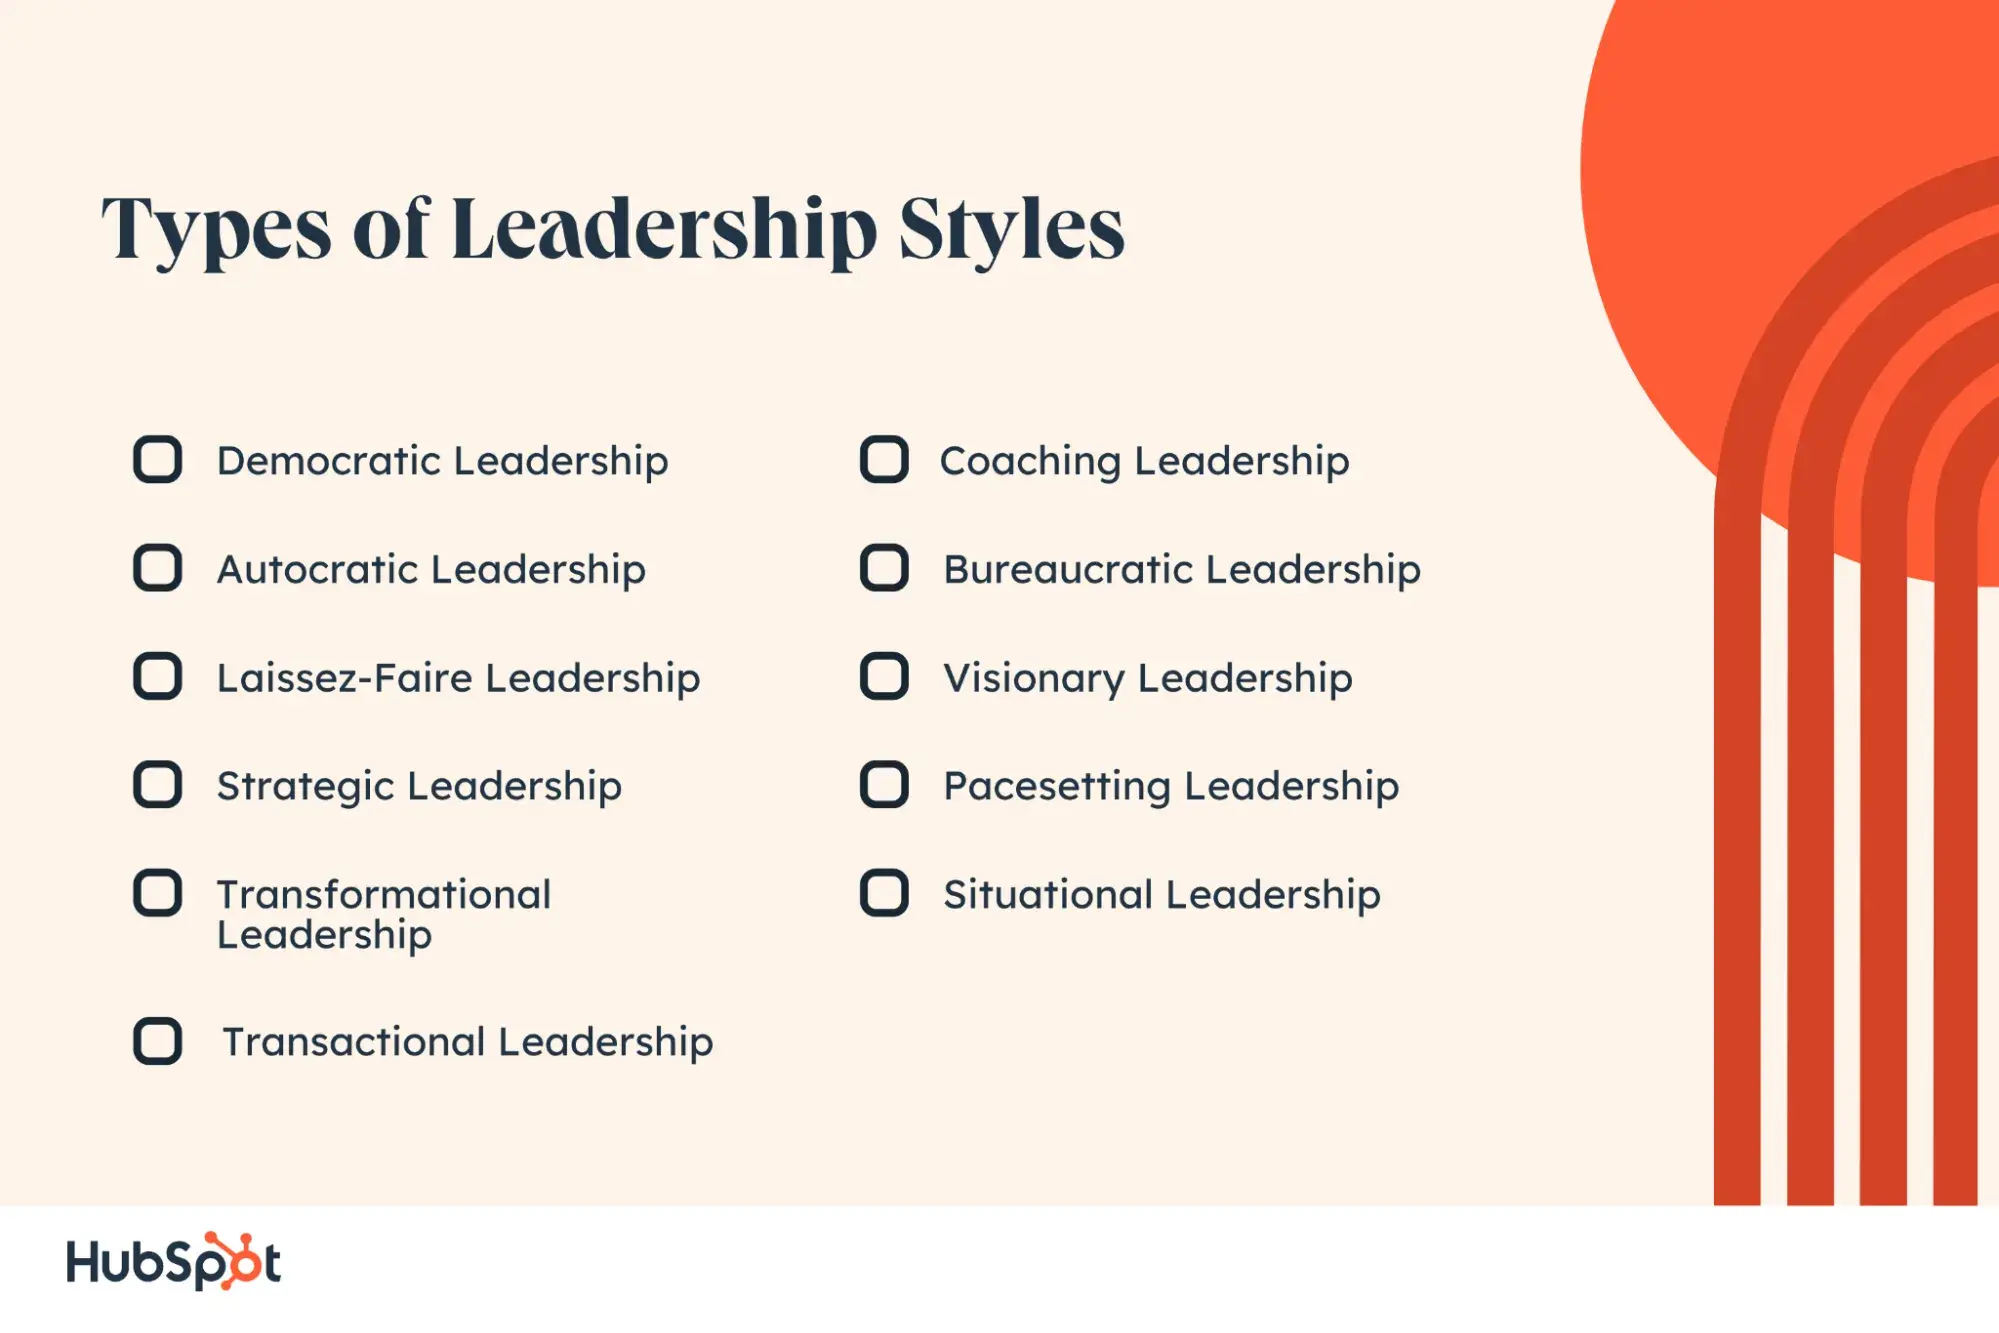 Infographic details the 11 types of leadership styles and a summary about each style.